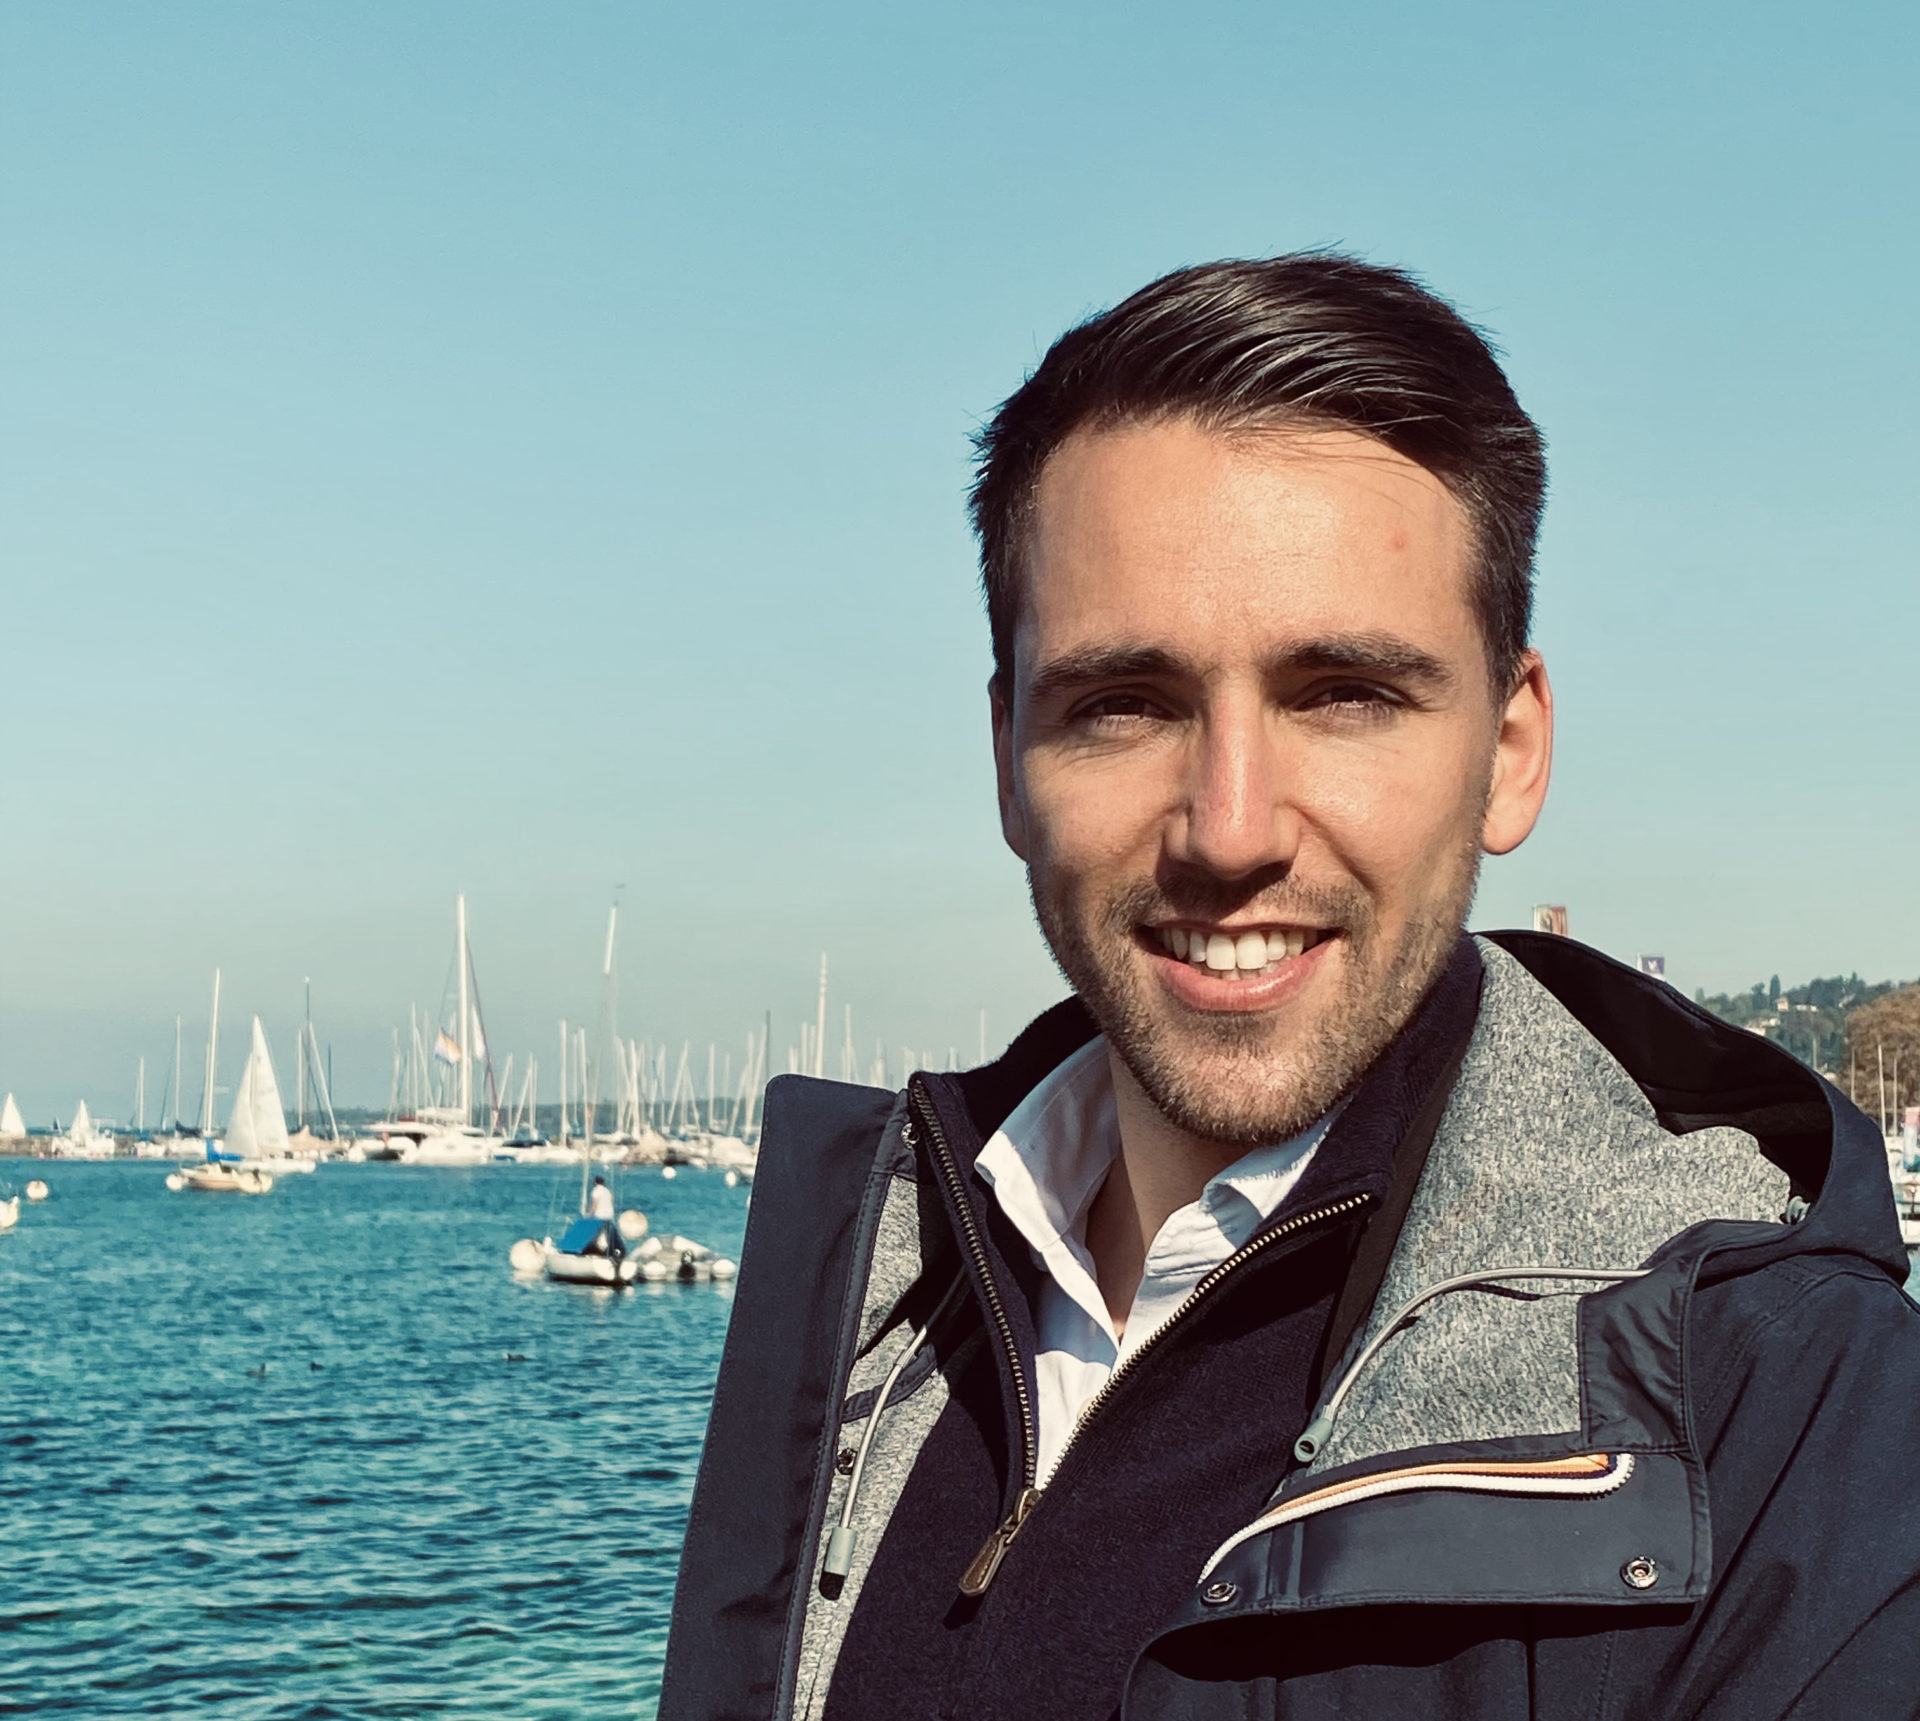 Meet Maxime, business manager at Falco